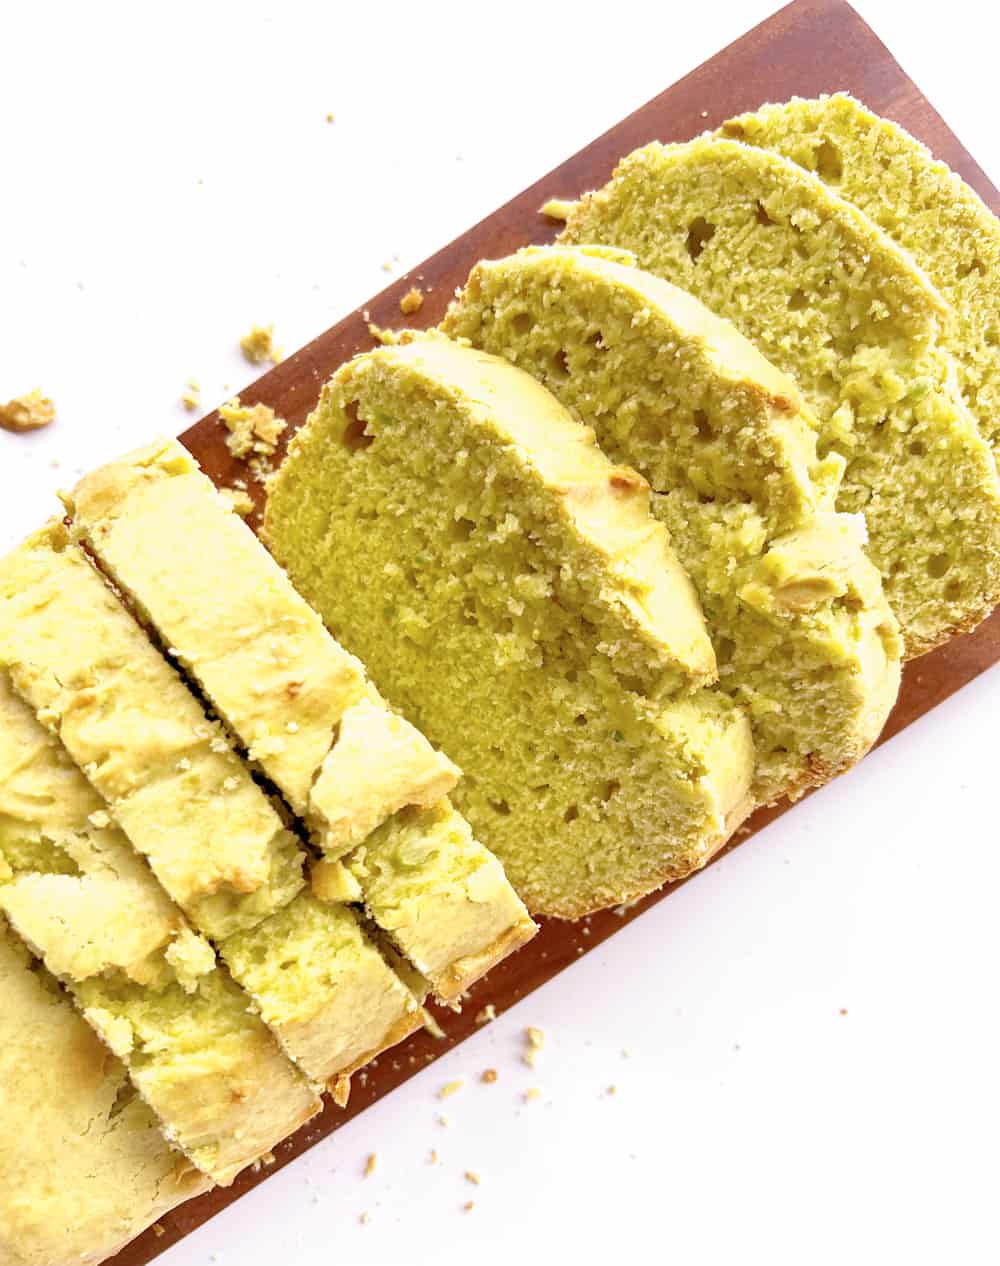 How To Make The Viral TikTok Avocado Bread With Just 5 Ingredients